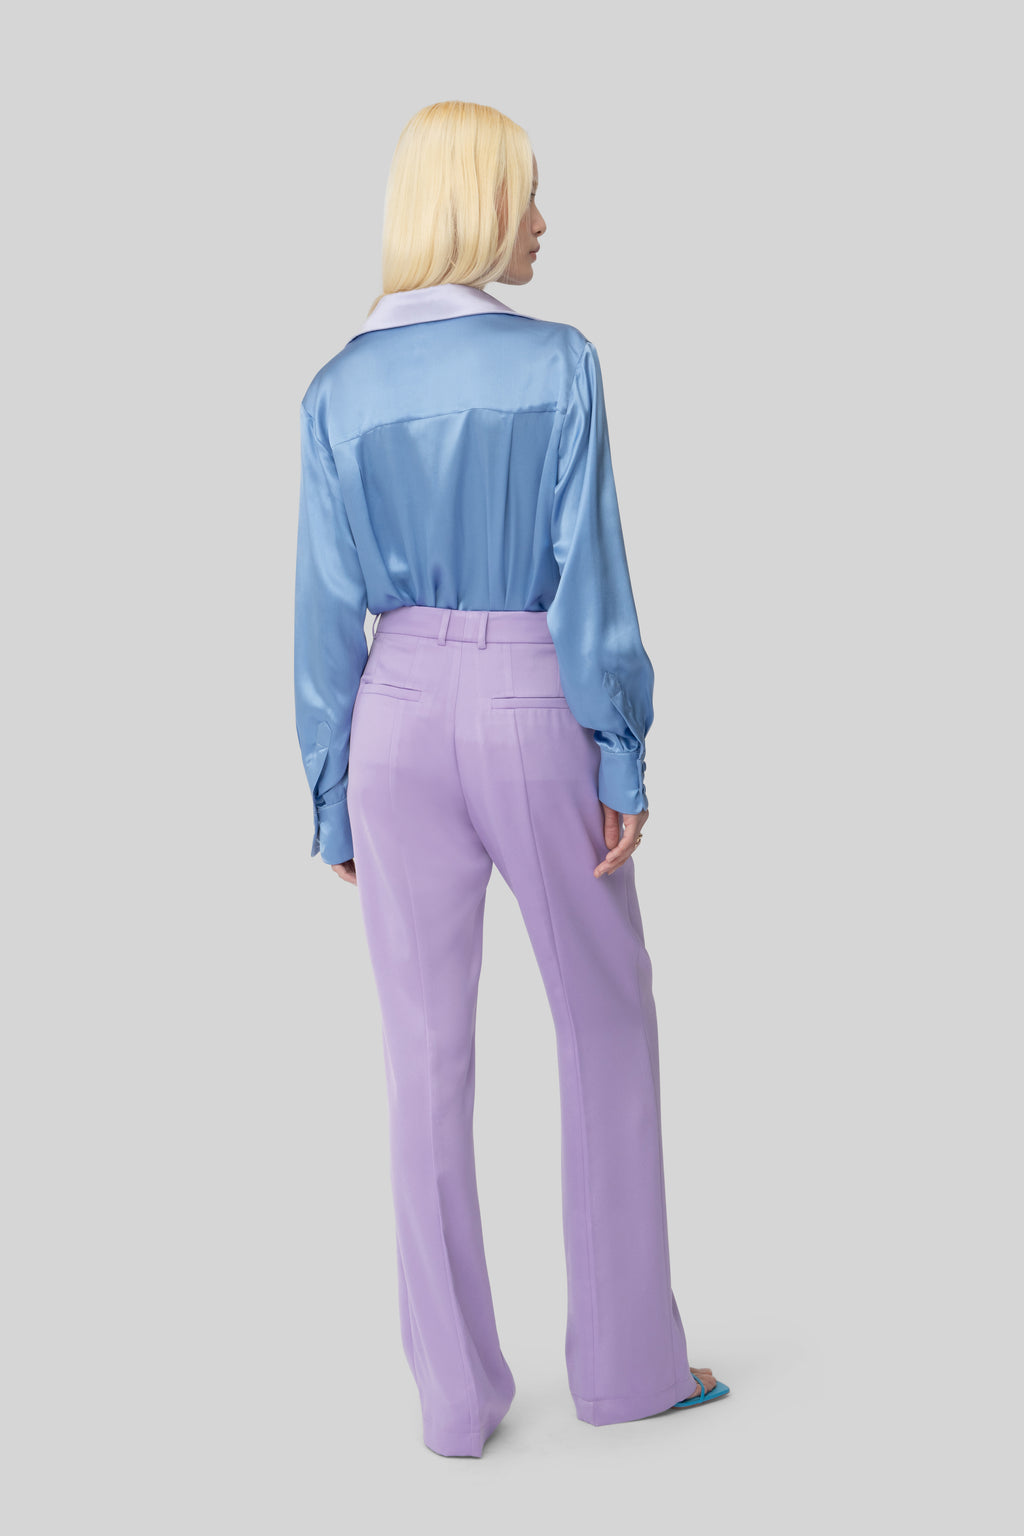 The Lilac Satin Lover Pants